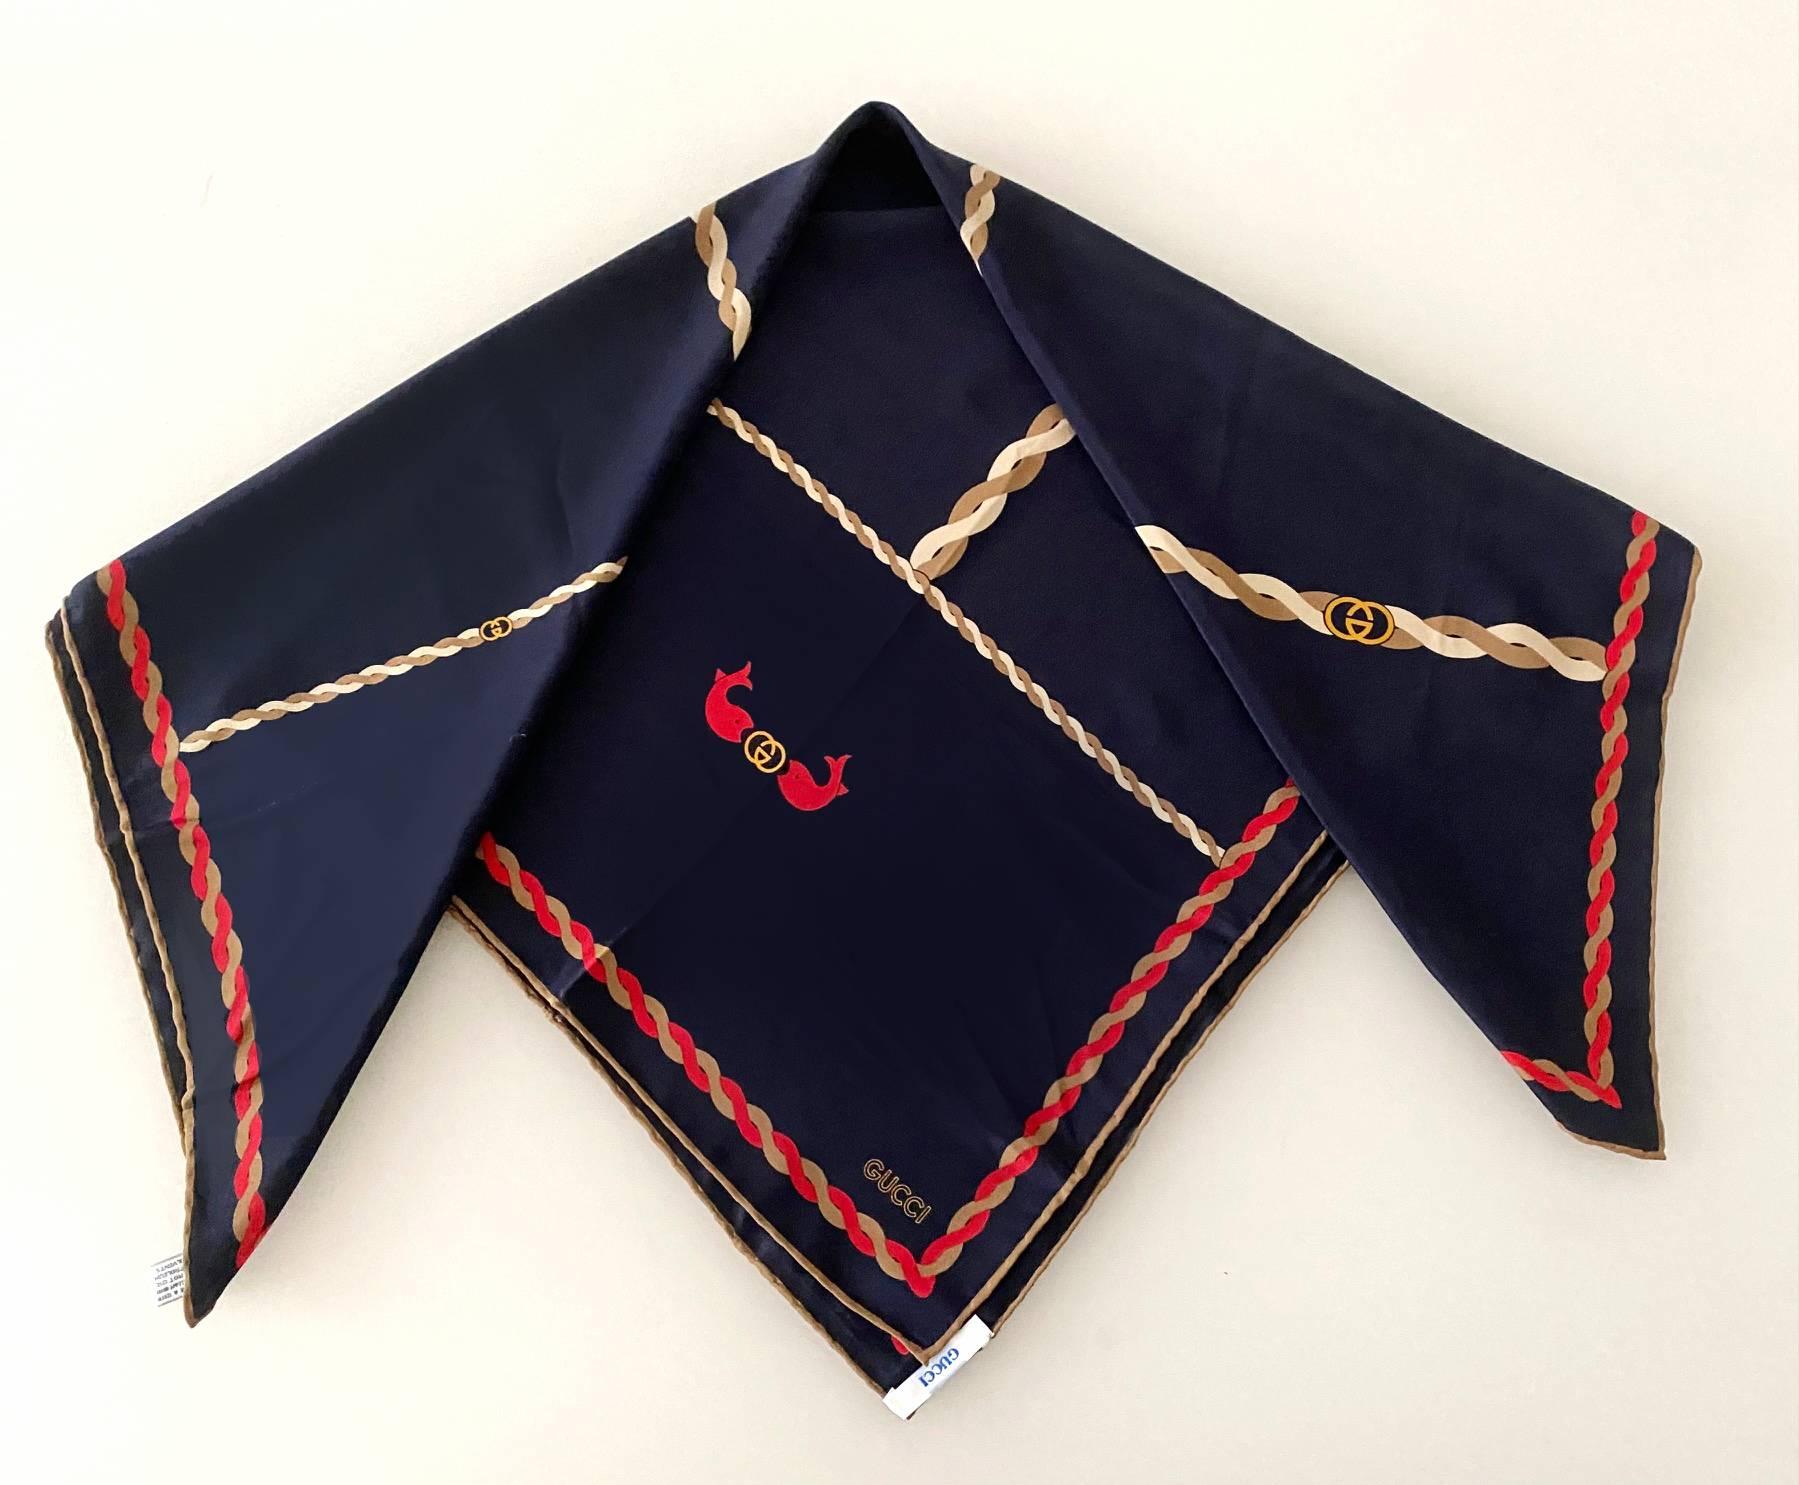 Square Navy blue silk scarf shawl with brow and red naval knot motif, Gucci logo,  100% silk, Made in Italy 
Condition: 1980s, vintage, new with box 
Measurements: 70x70cm